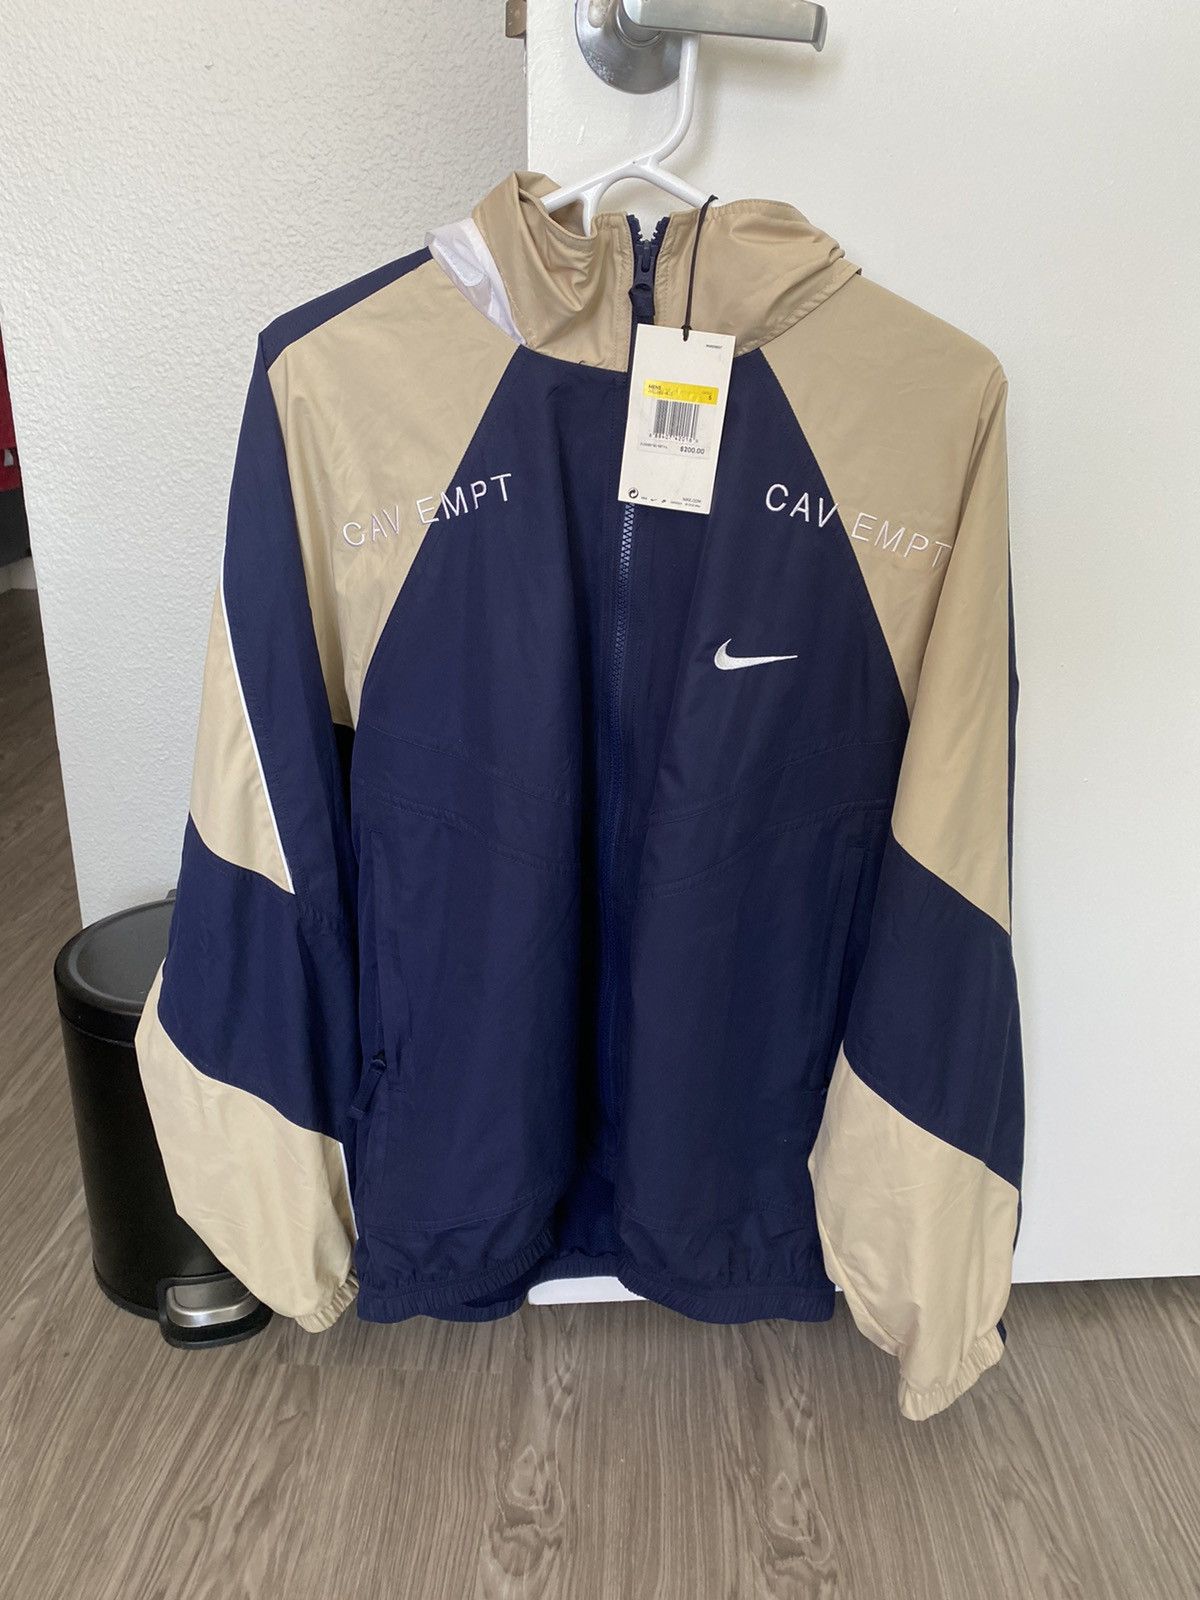 Nike Cav Empt x Nike Track Jacket Size US S / EU 44-46 / 1 - 1 Preview